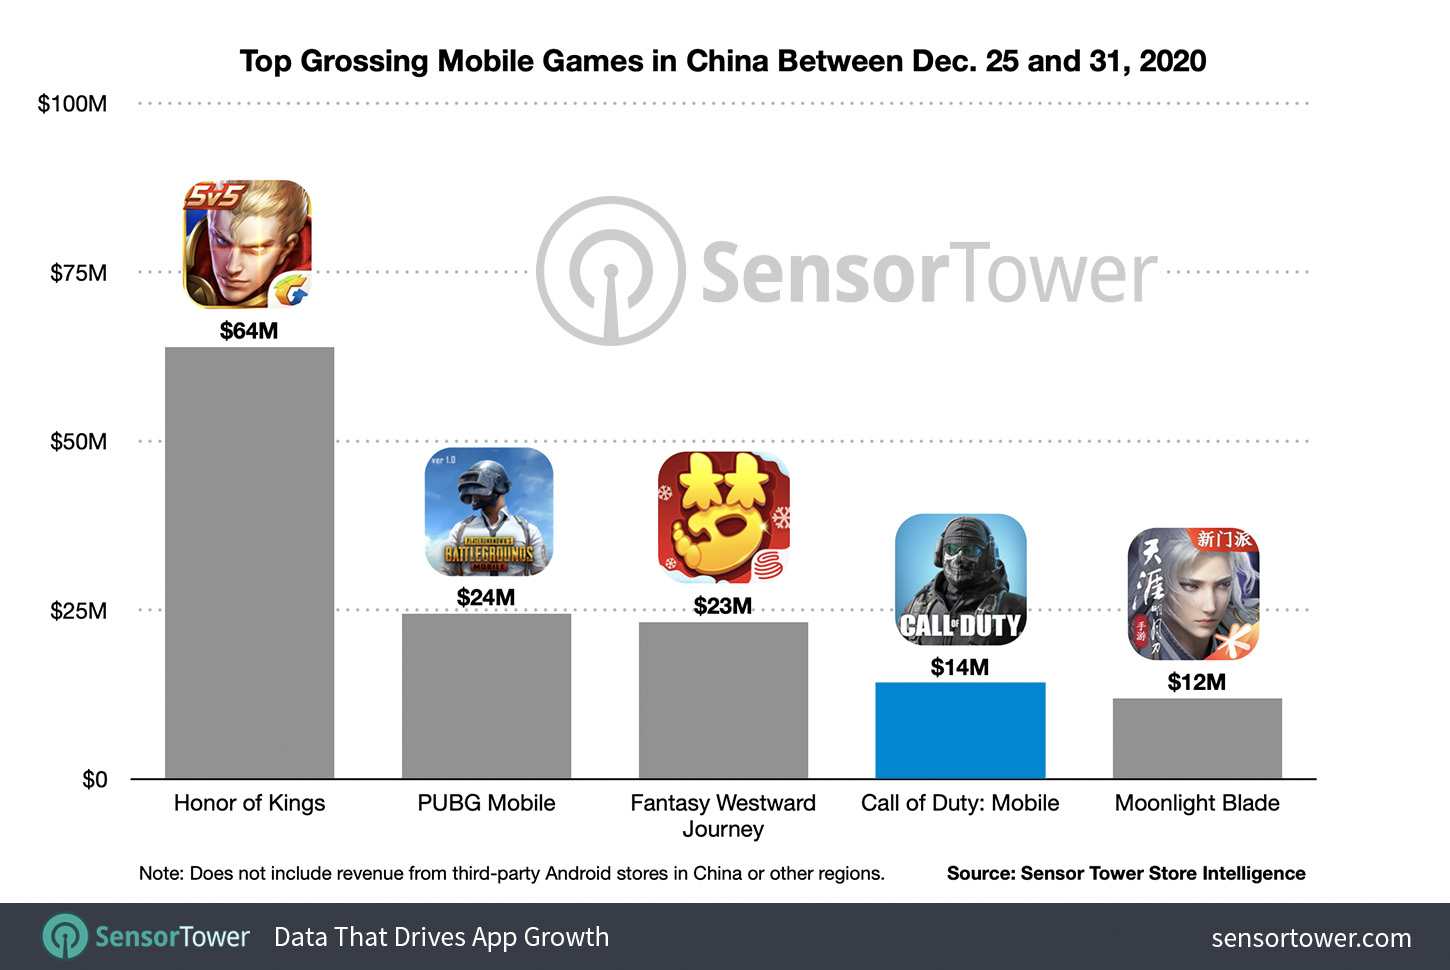 Top Grossing Mobile Games in China Between December 25 and 31, 2020